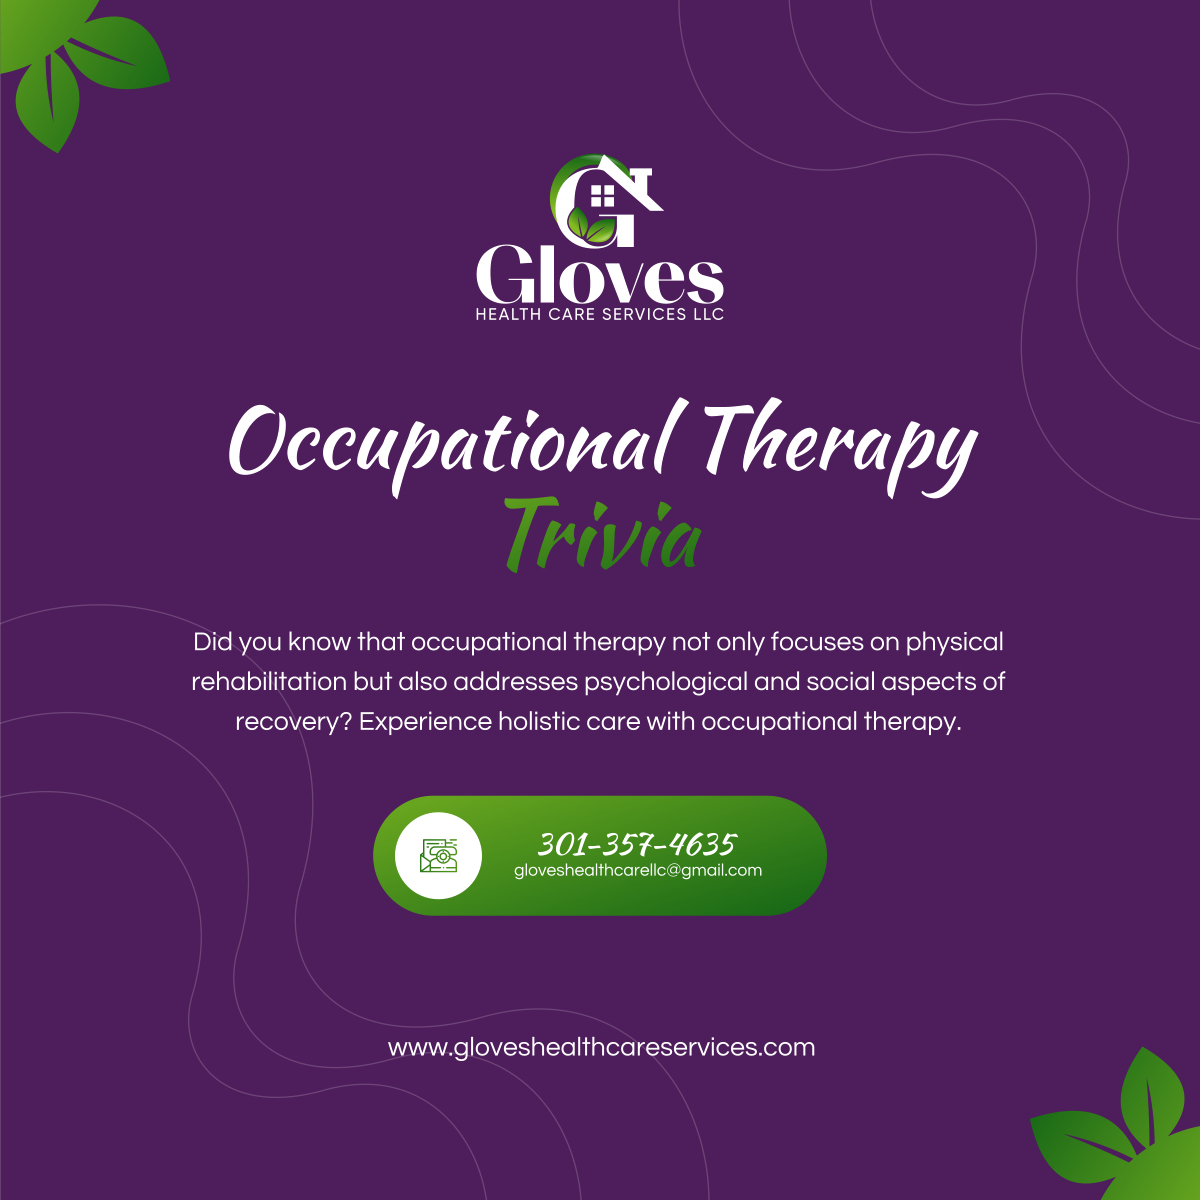 Discover the holistic approach of occupational therapy to enhance your well-being. Contact us today to explore personalized therapy options.

#SilverSpringMD #HomeHealthCare #OccupationalTherapy